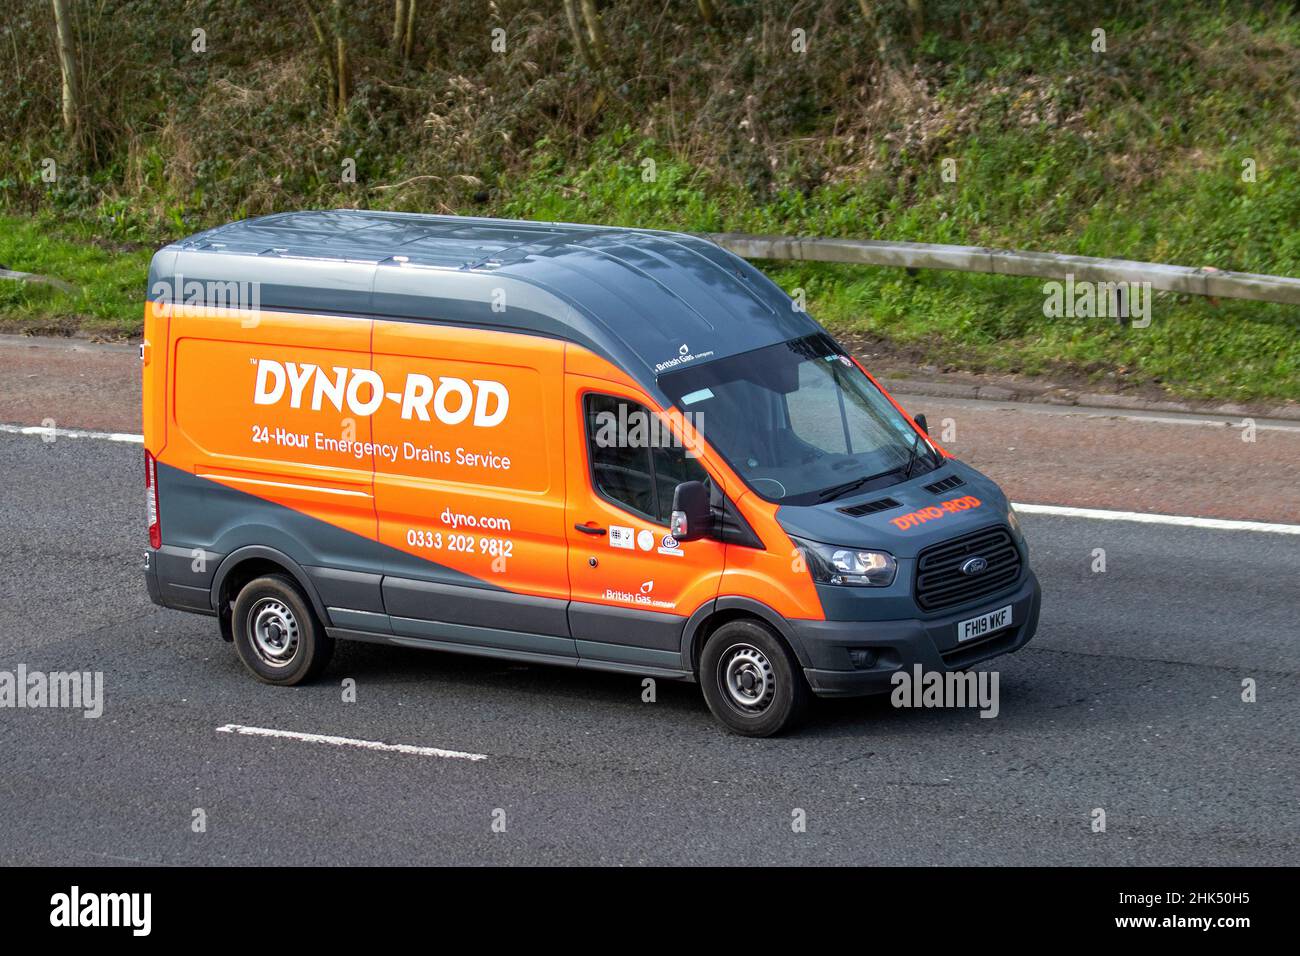 Dyno-Rod 24-hour Emergency Drains Service, a British Gas Company 2019 Ford Transit service vehicle. UK; Vehicular traffic, moving vehicles, cars, vehicle driving on UK roads, motors, motoring on the M6 motorway highway UK road network. Stock Photo